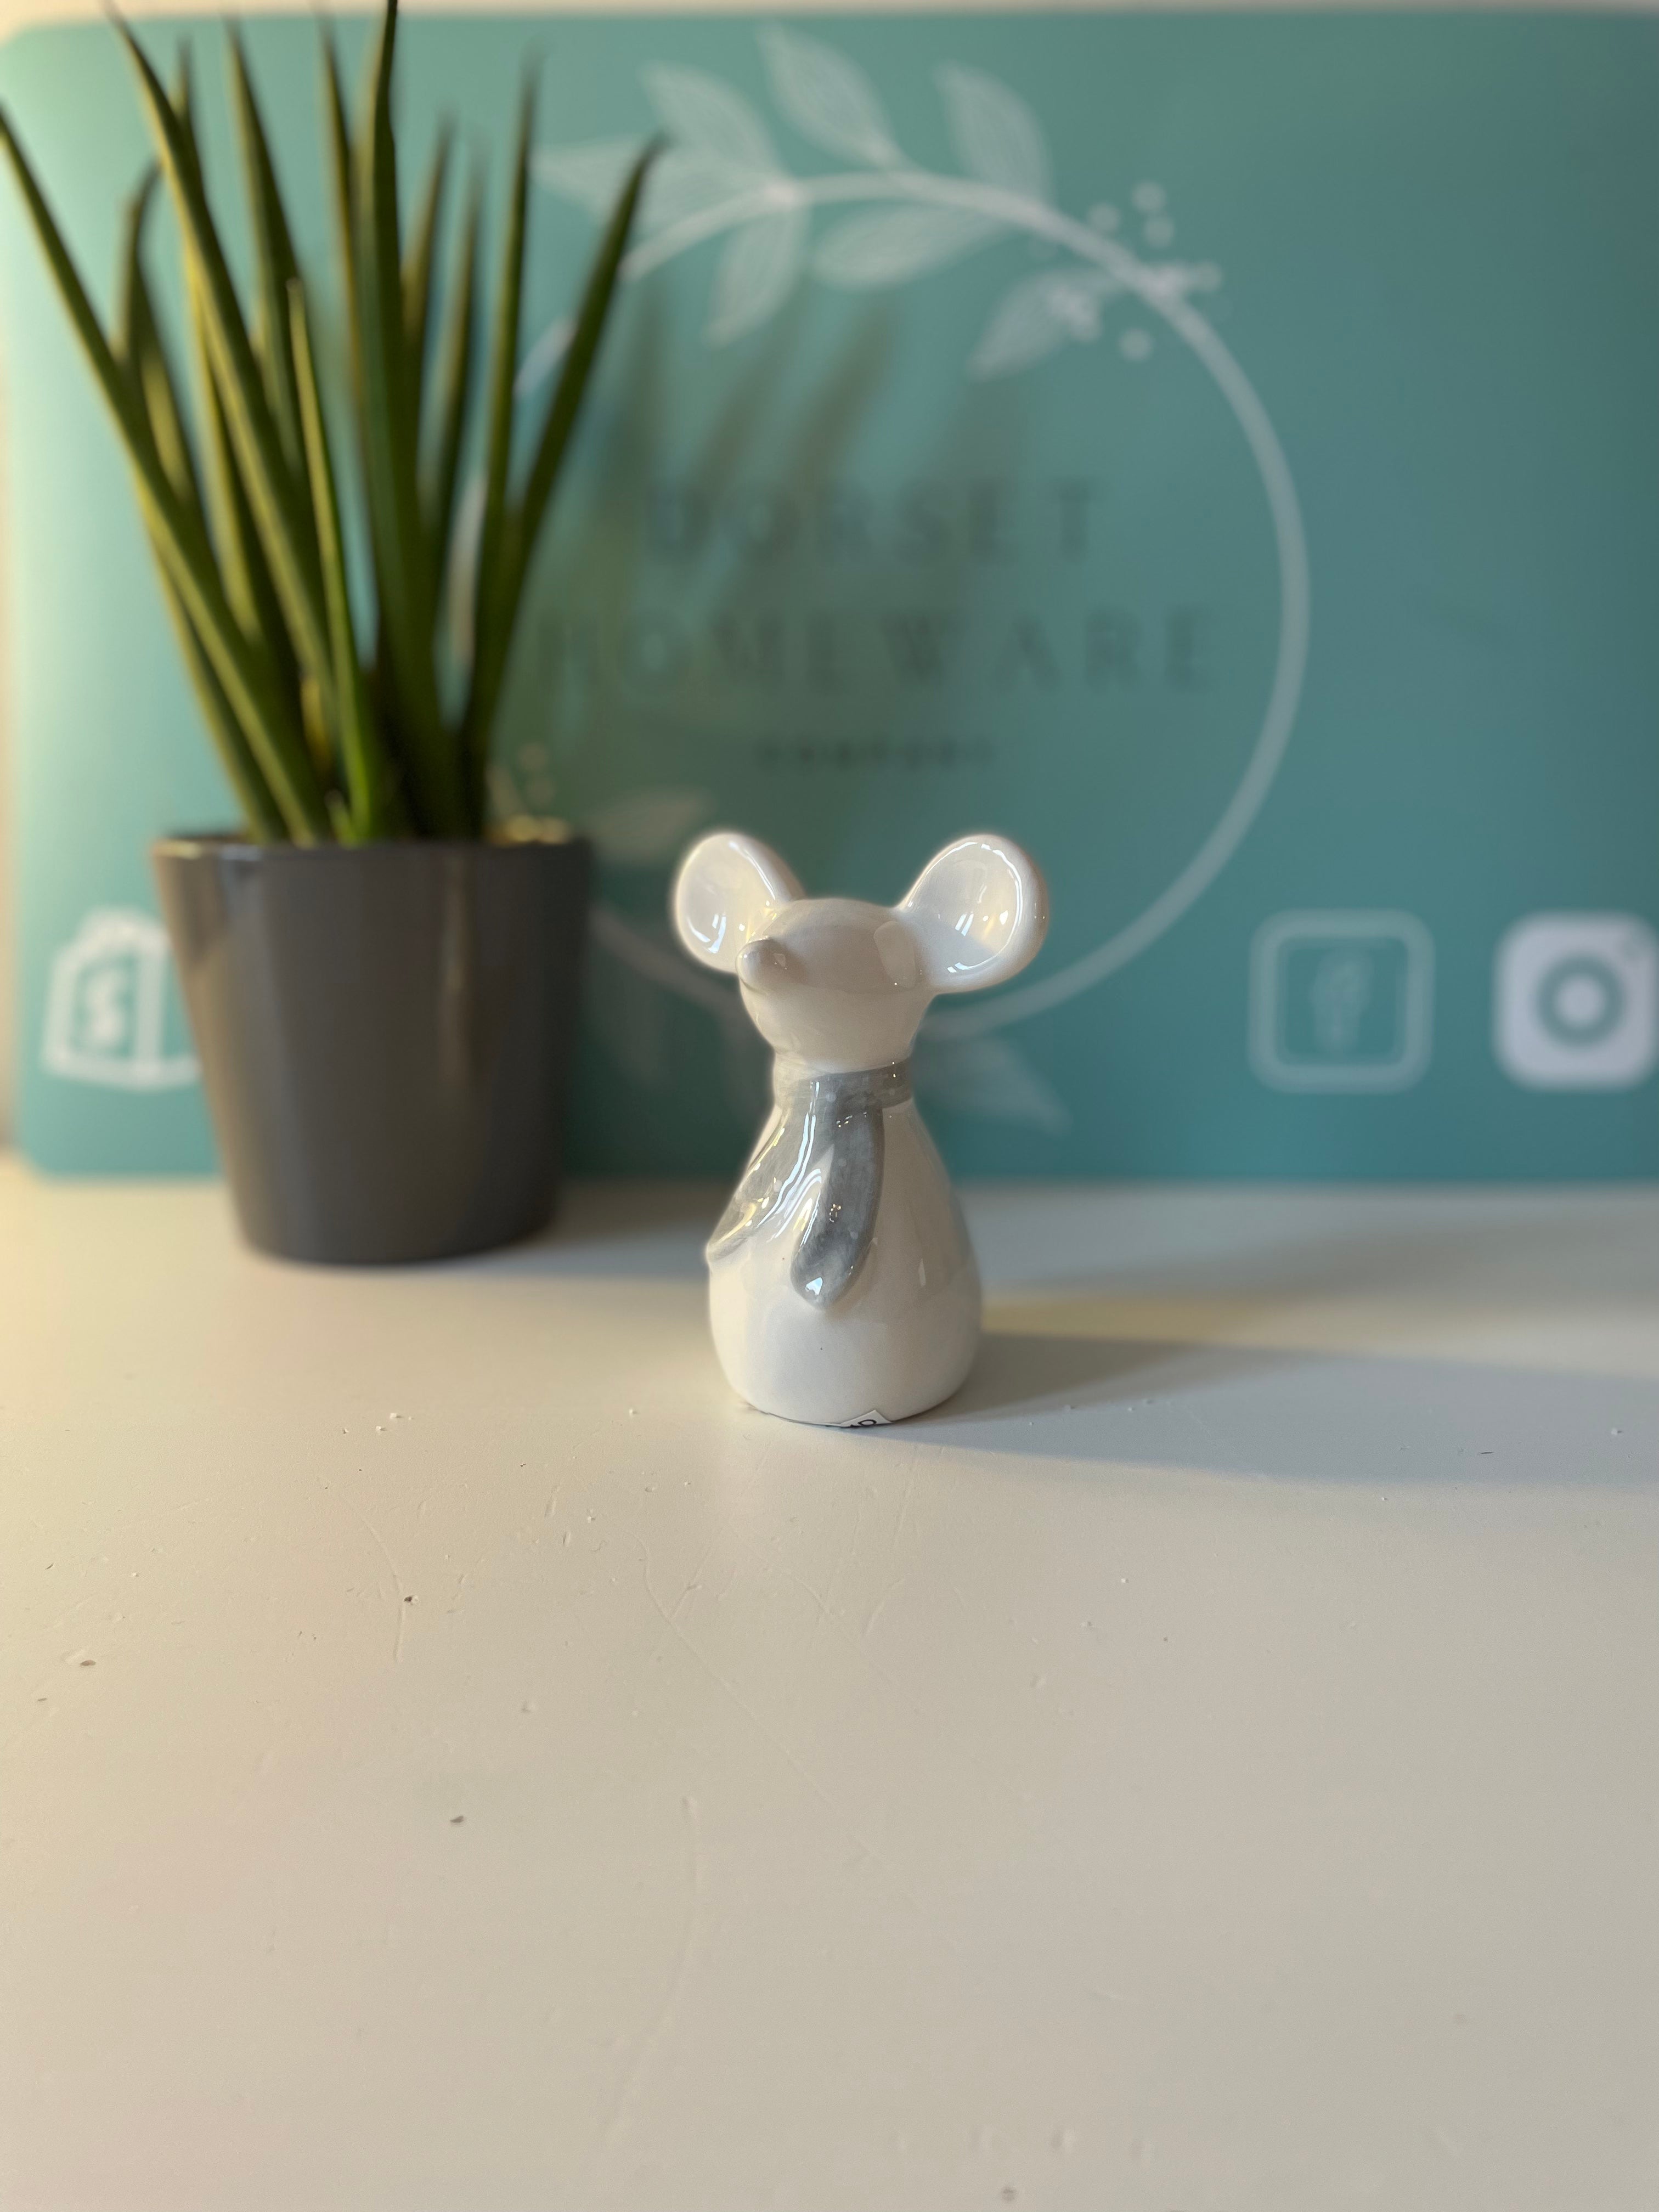 SID THE MOUSE, 10CM